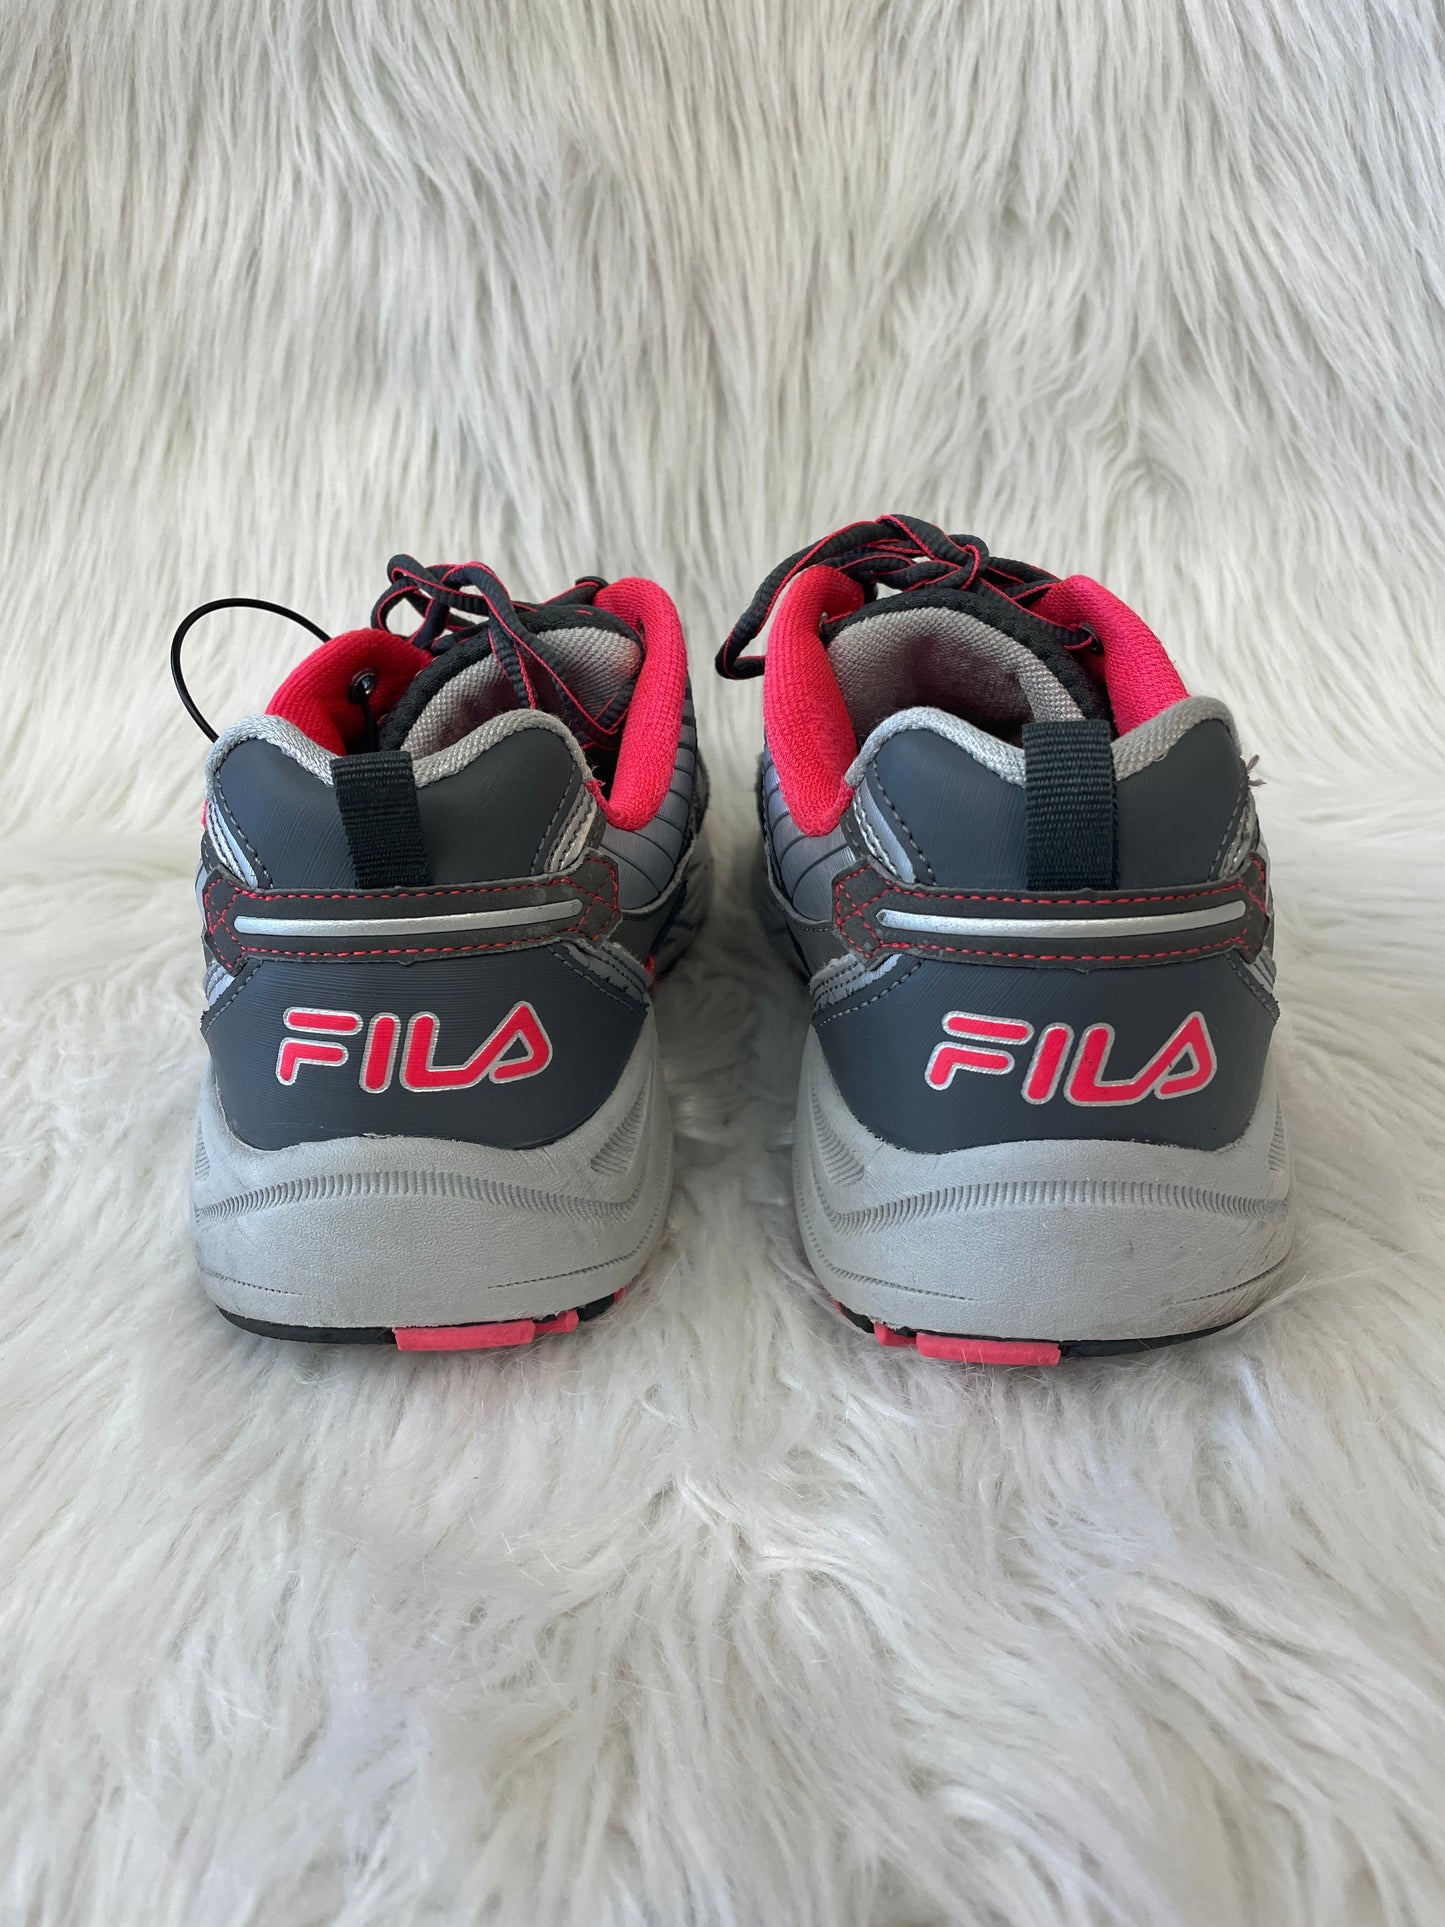 Shoes Athletic By Fila  Size: 11